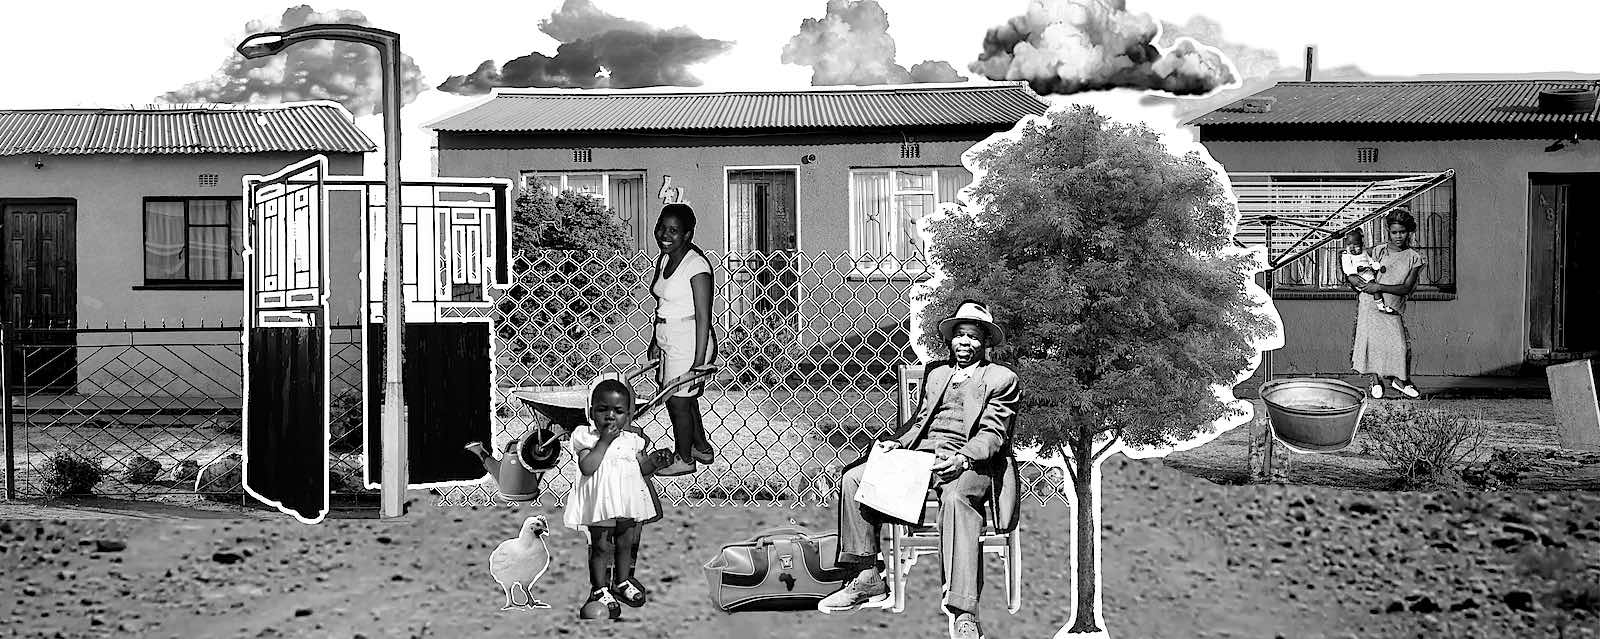 Black and white collage image of two women, one of whom is carrying a baby, a man and a small child, a tree, a streetlamp and a door in front of three houses